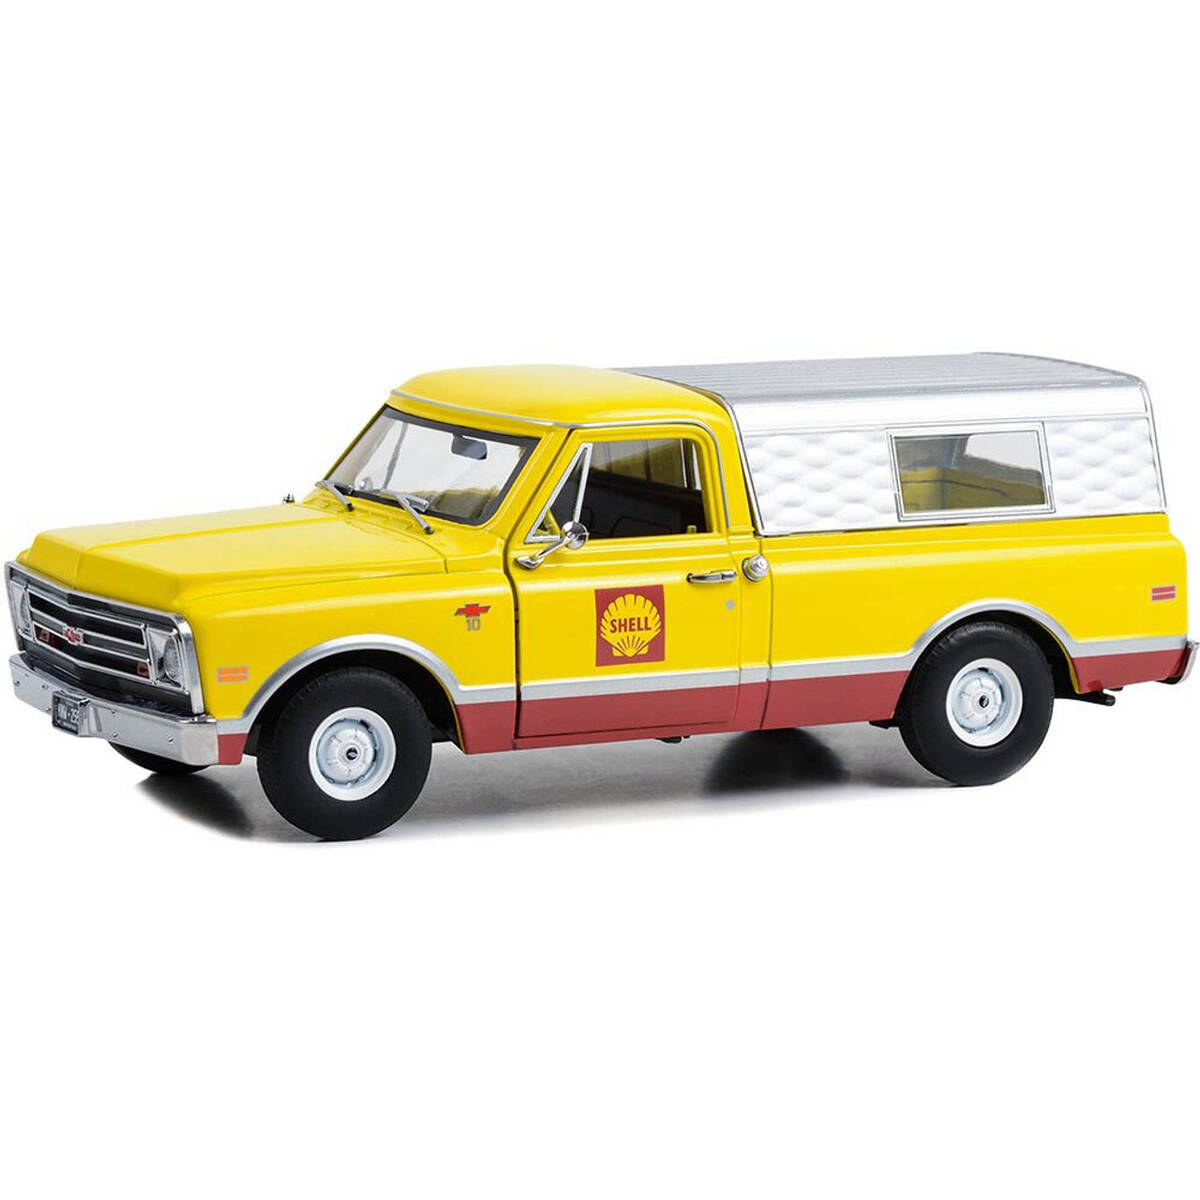 Greenlight 1/24 Running on Empty Series 6- 1968 Chevrolet C-10 with Camper Shell - Shell Oil 85070-B